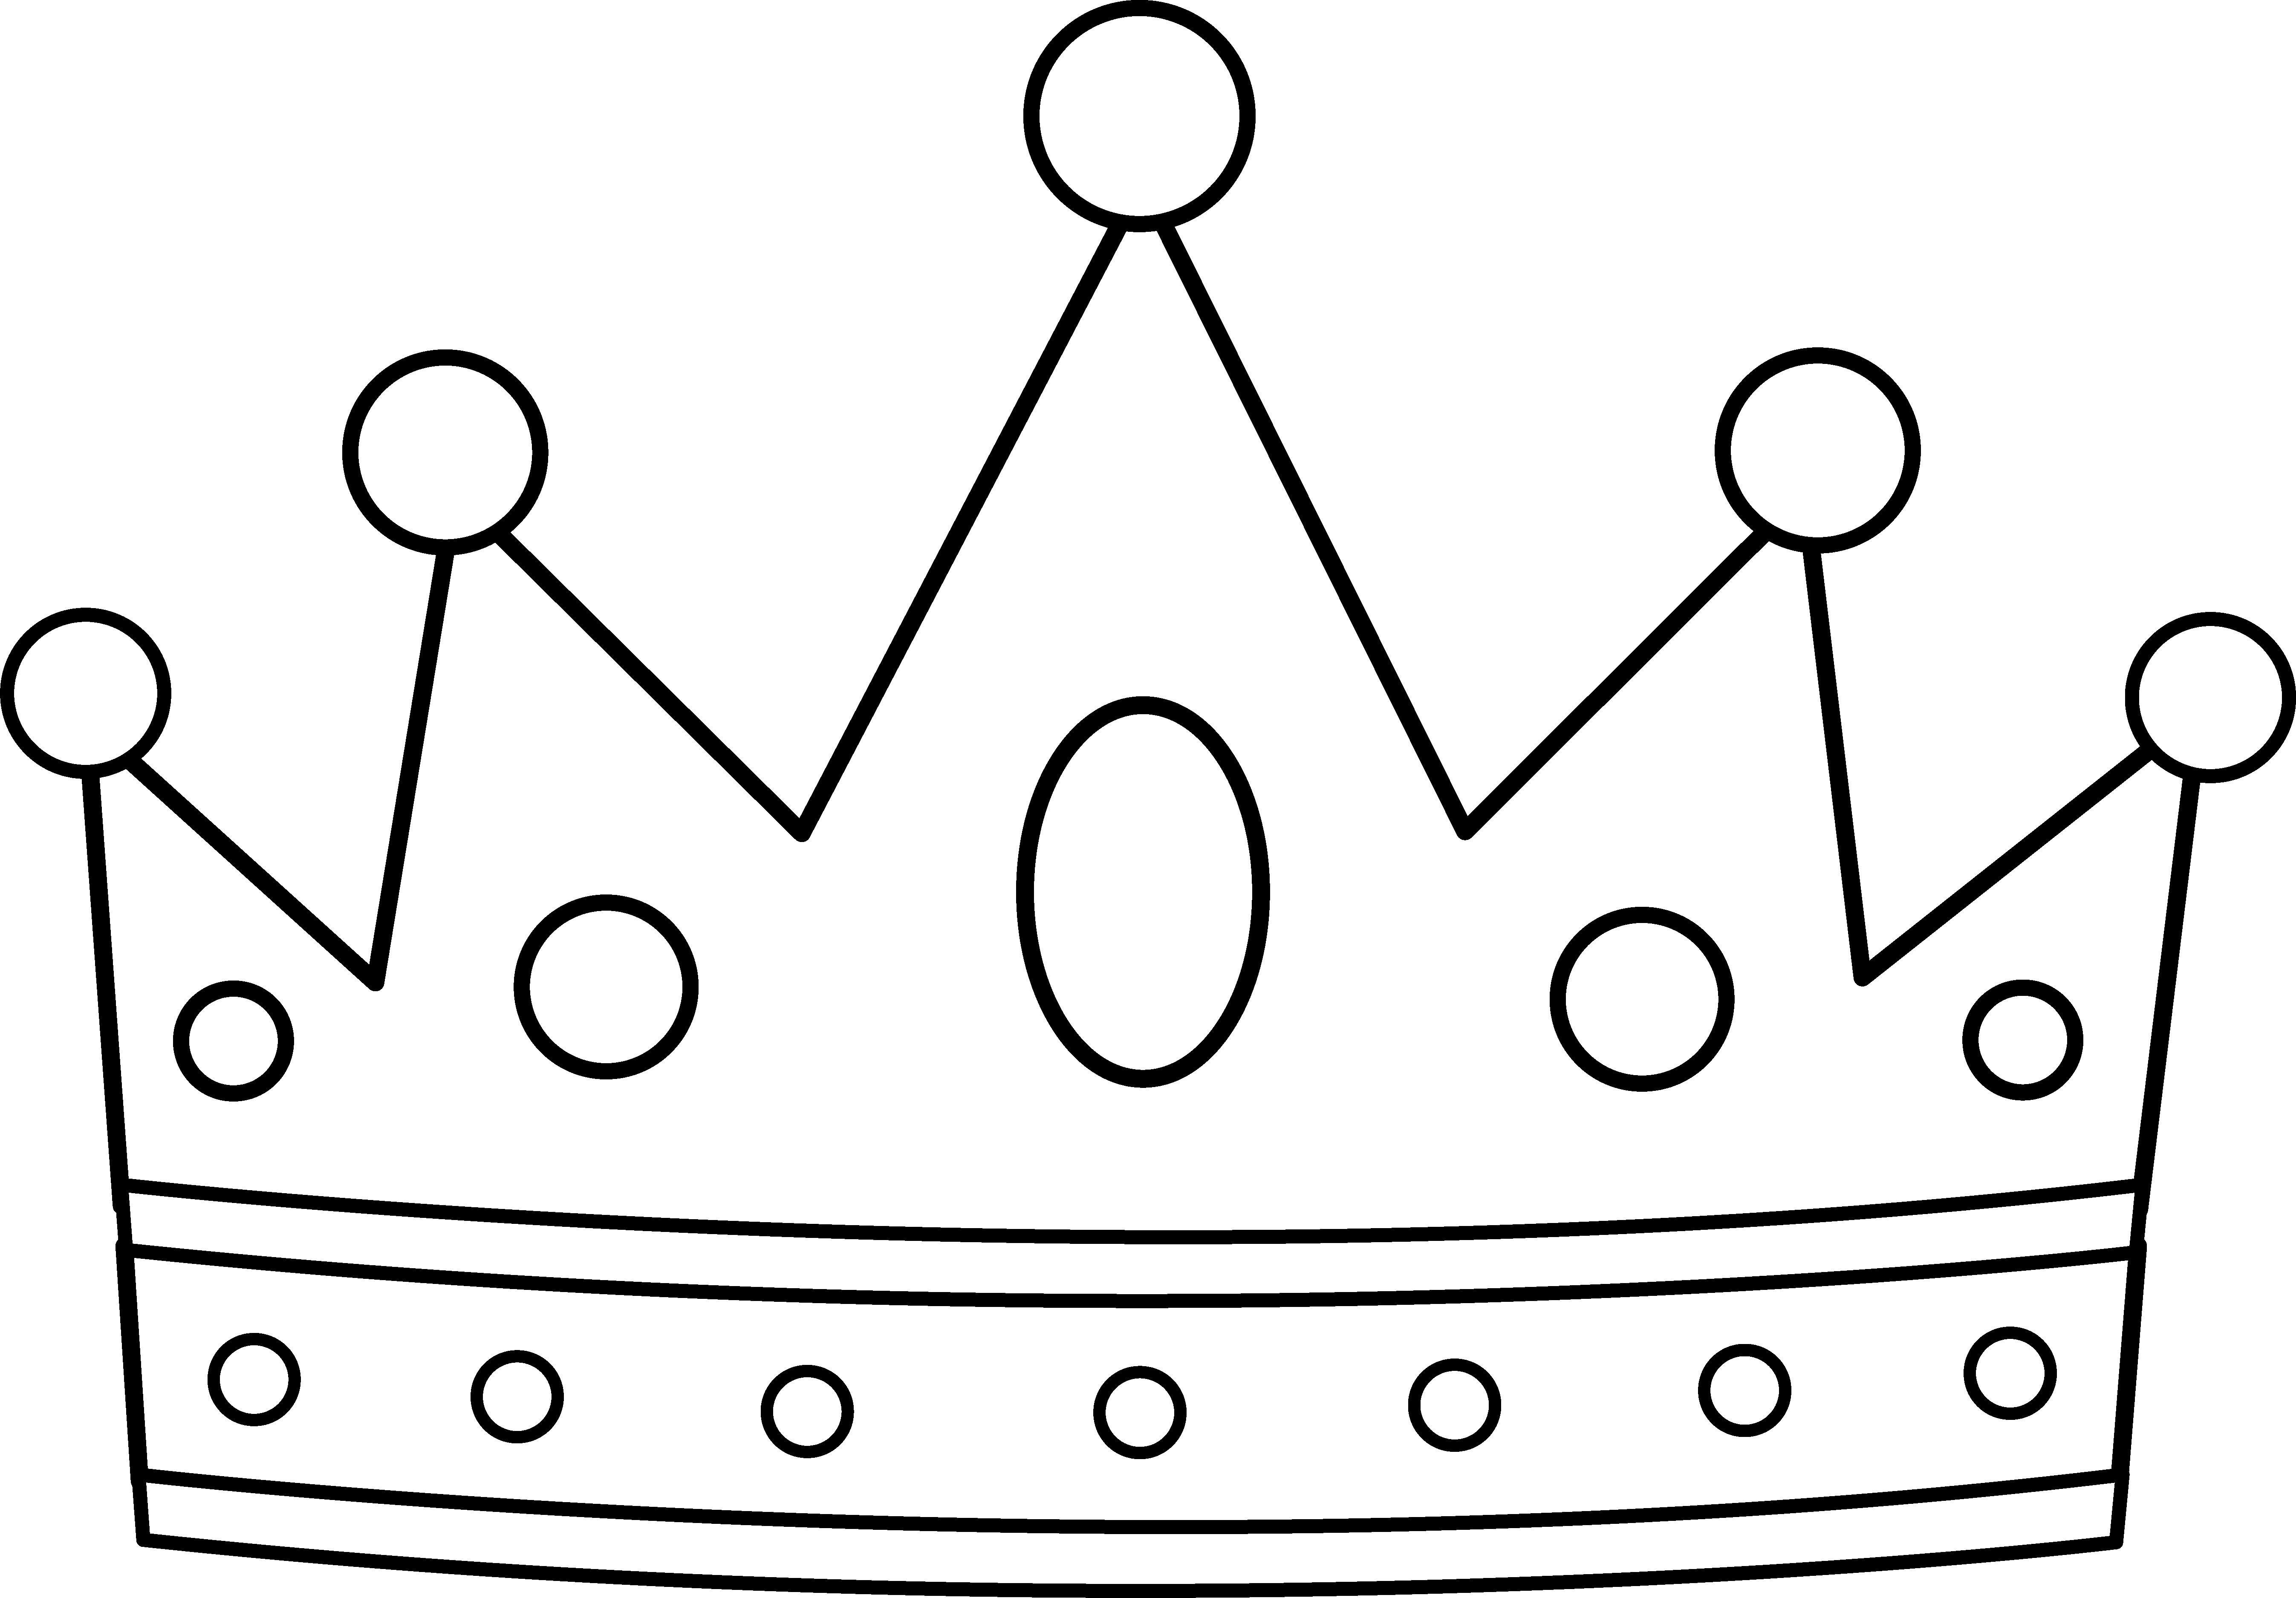 Royal Crown Coloring Page Free Clip Art